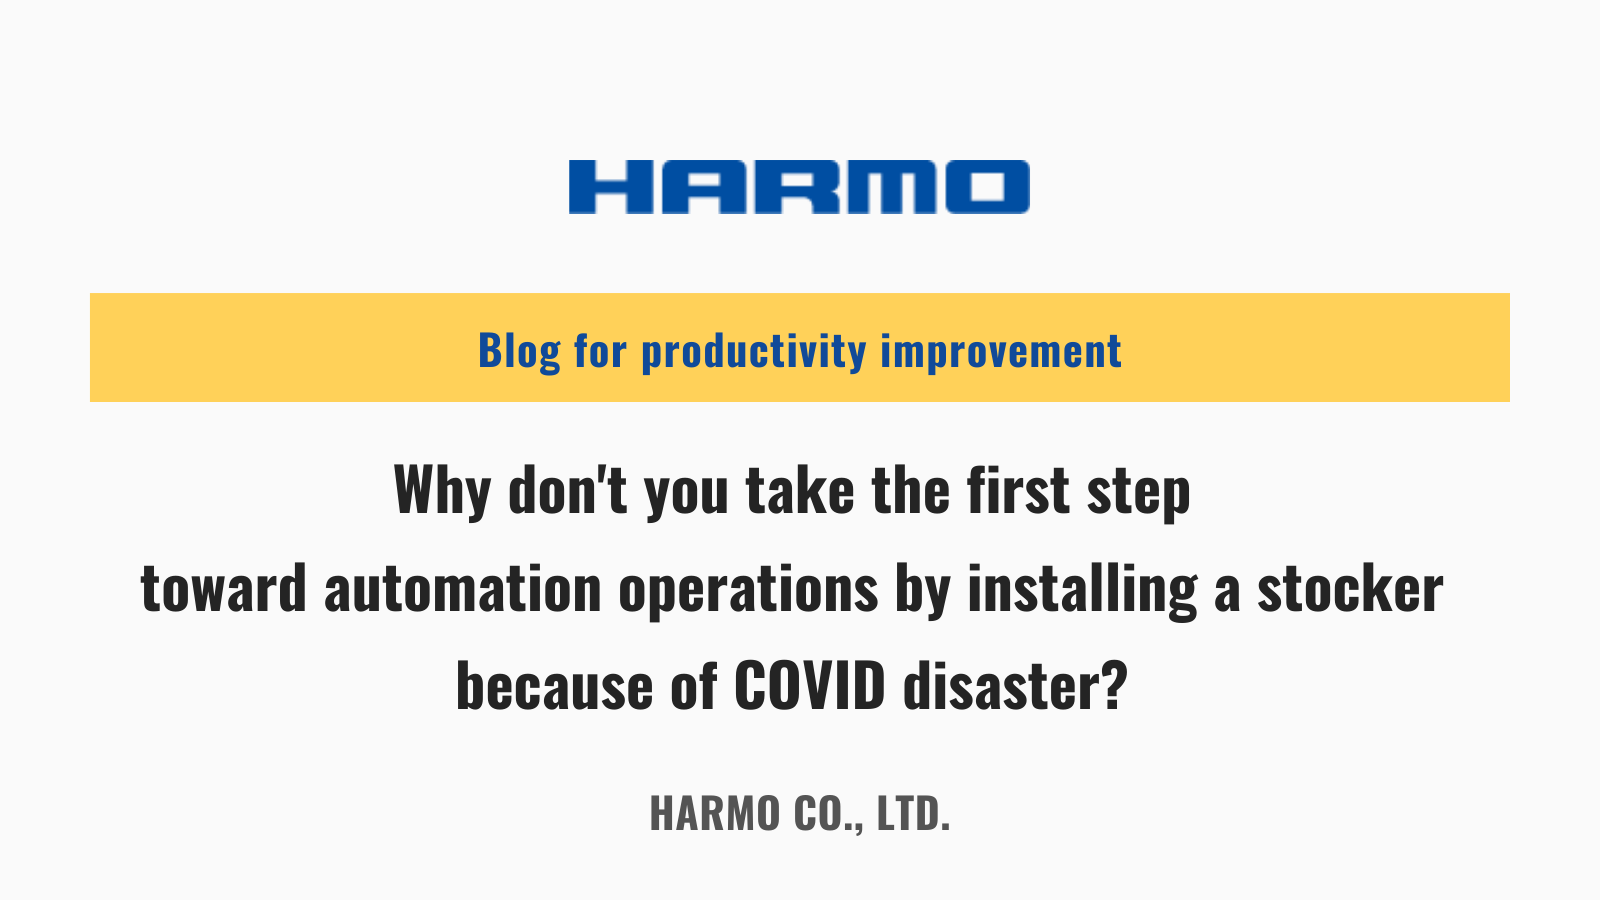 Why don't you take the first step toward automation operations by installing a stocker because of COVID disaster?